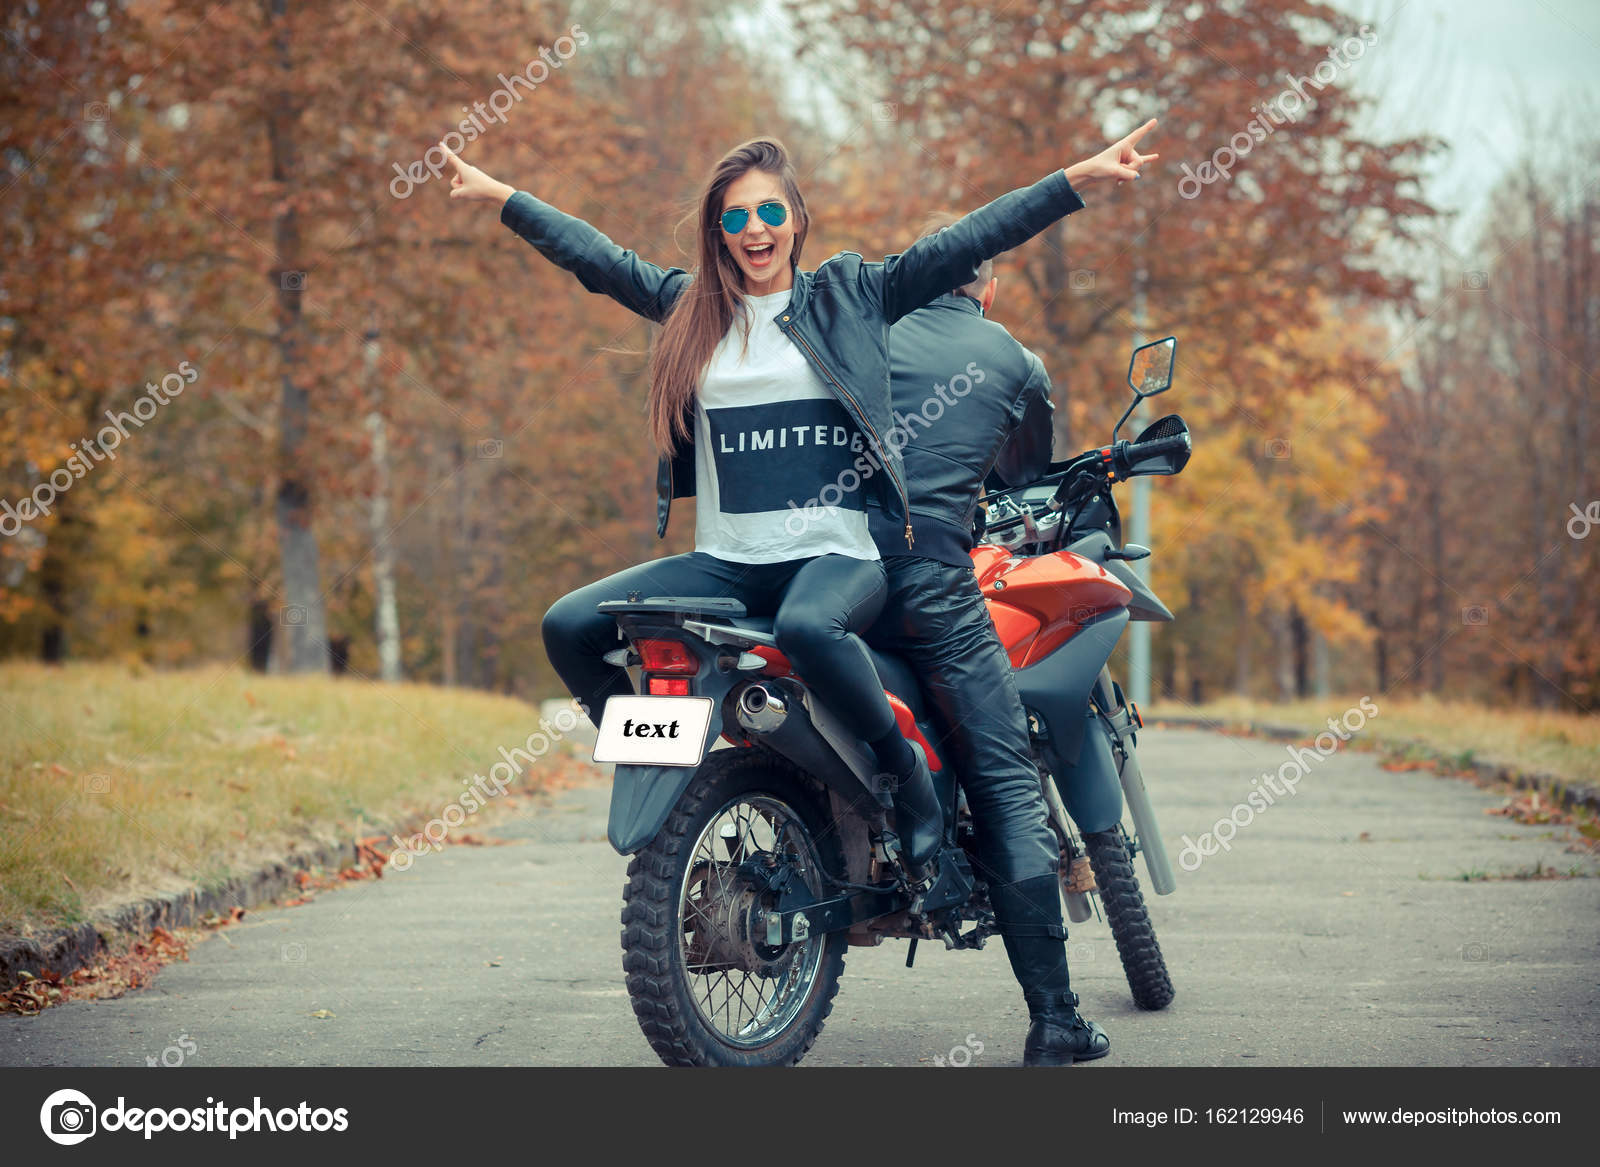 Edgy Vancouver Couple Takes Harley Motorcycle for a Spin at Engagement  Session… | Wedding photoshoot poses, Pre wedding photoshoot outdoor,  Wedding photoshoot props